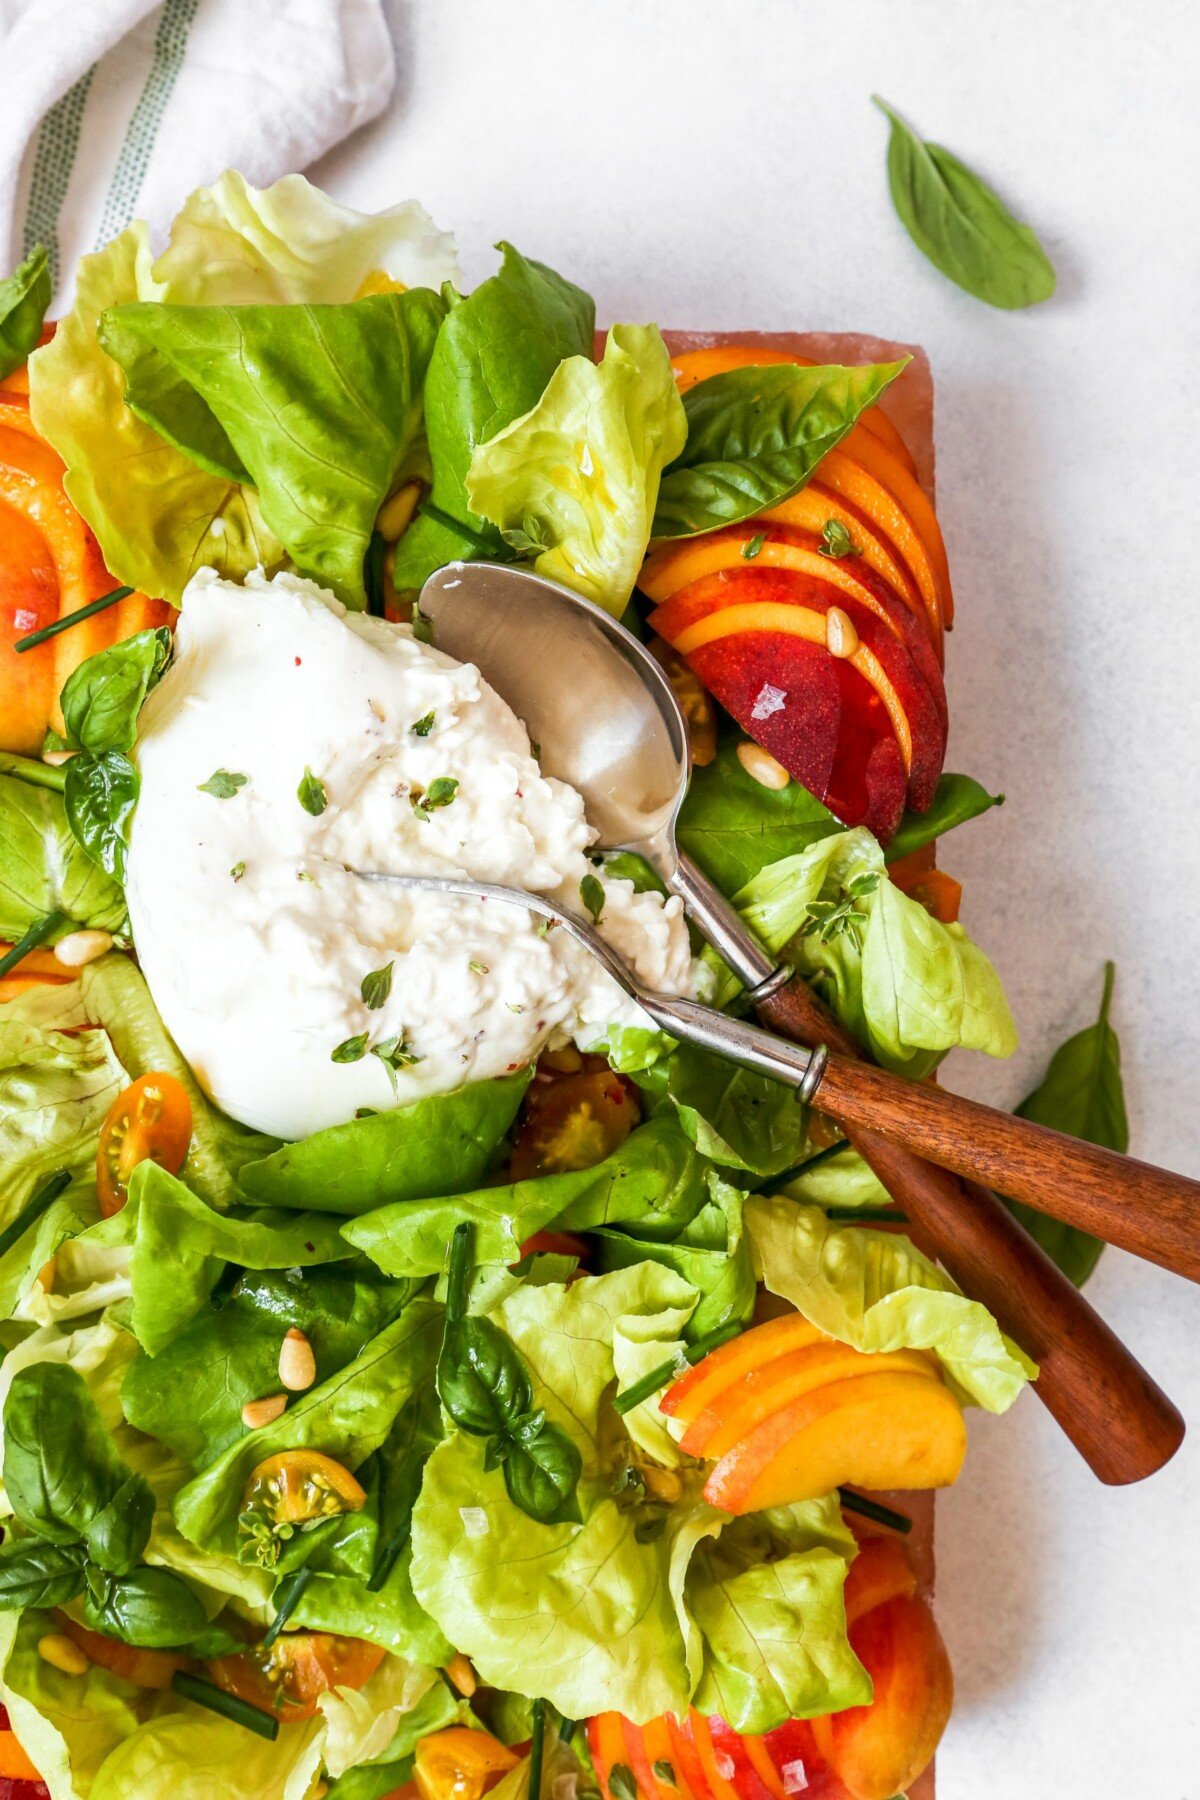 Leafy green salad with peaches, herbs, and burrata arranged on a pink platter, or salt block, set on a white surface.